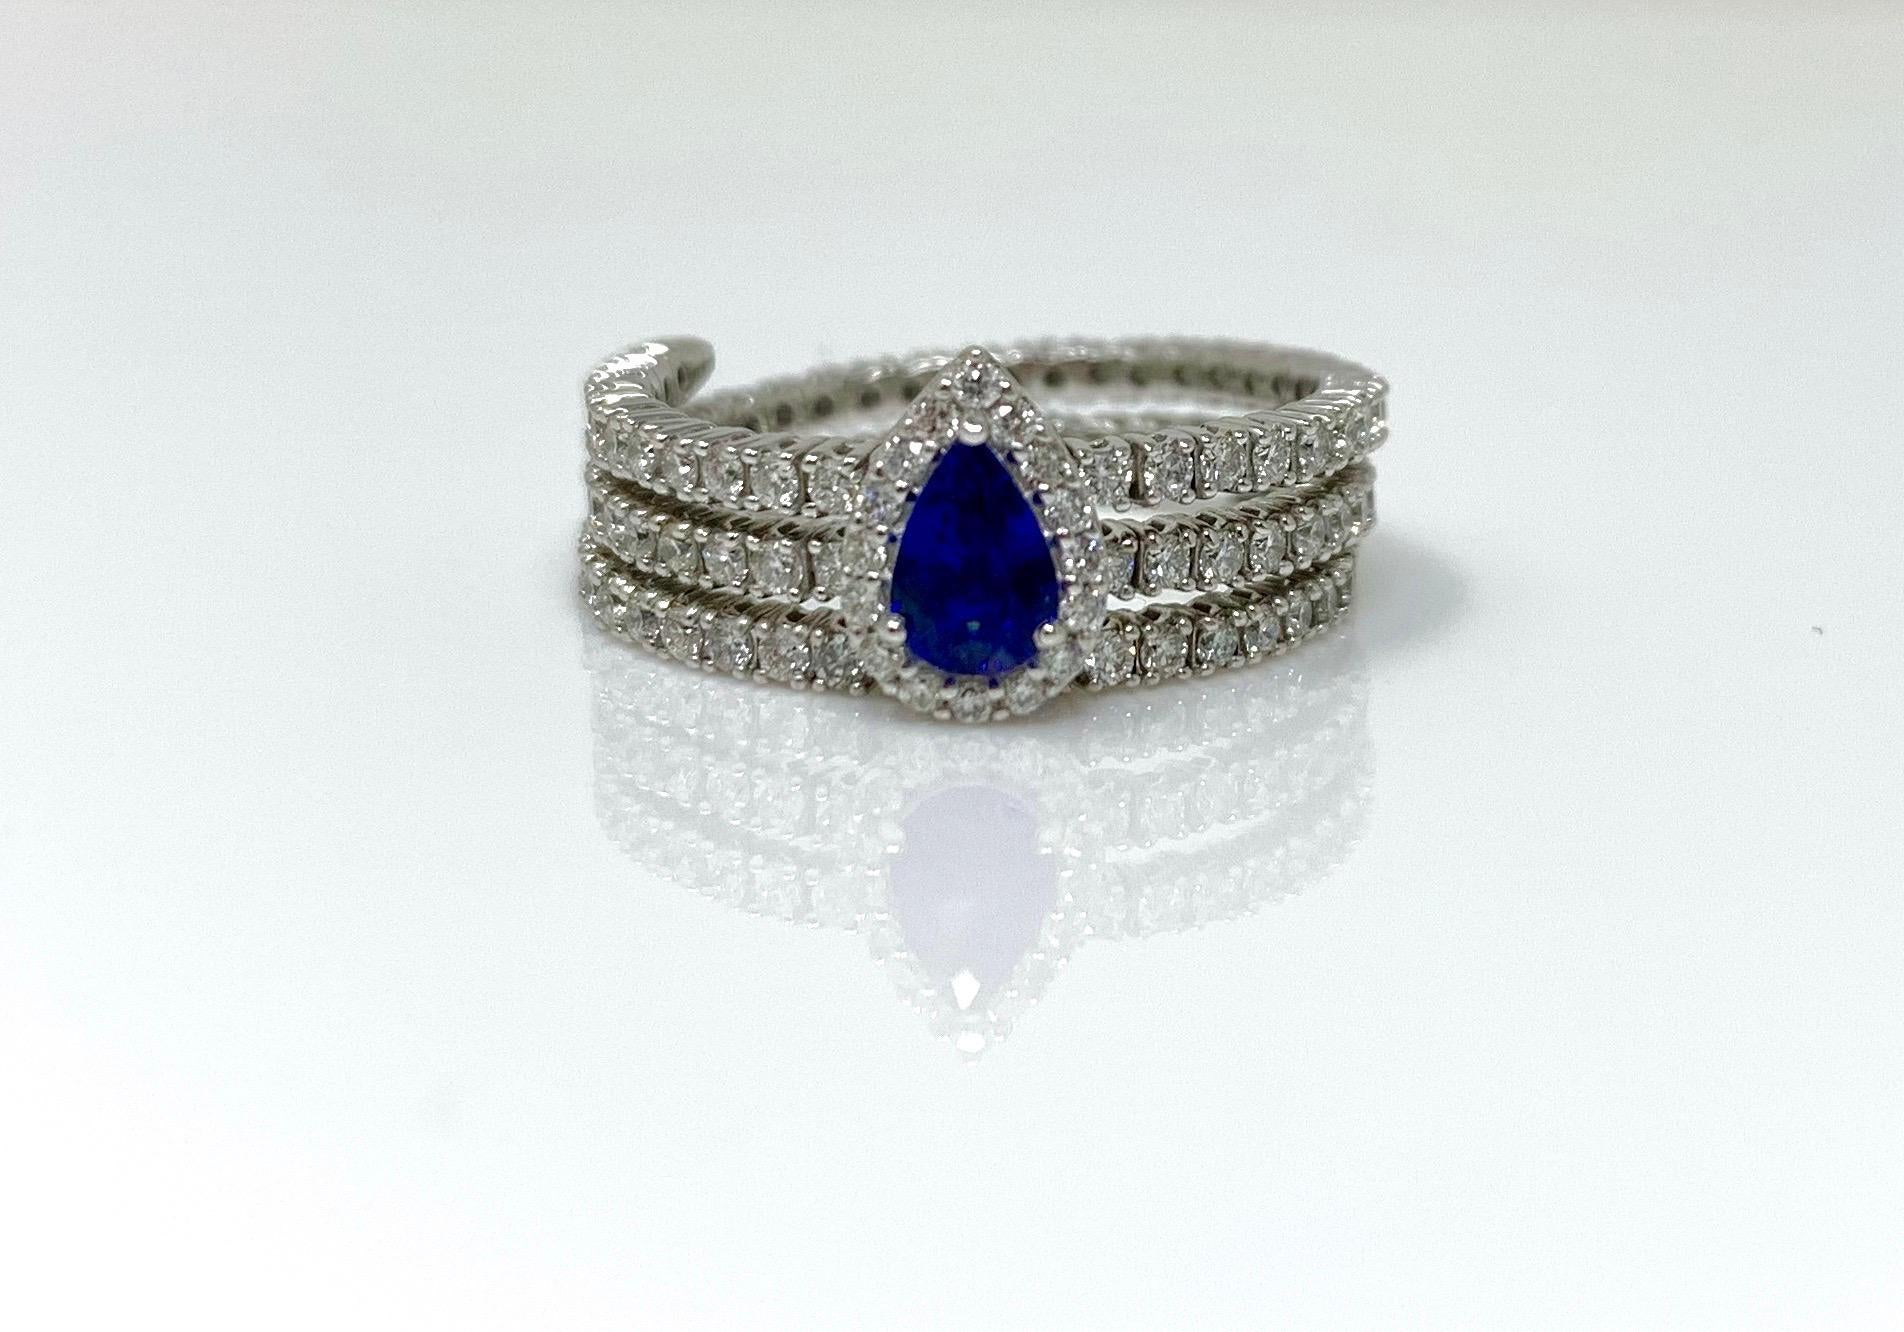 MOGULDIAM INC blue sapphire and diamond flexible ring set in 14 k white gold. This ring doesn't have ring size it can fit any finger size. video can be shared upon request. 
The details are as follows : 
Blue sapphire : 0.47 carat 
White diamond :